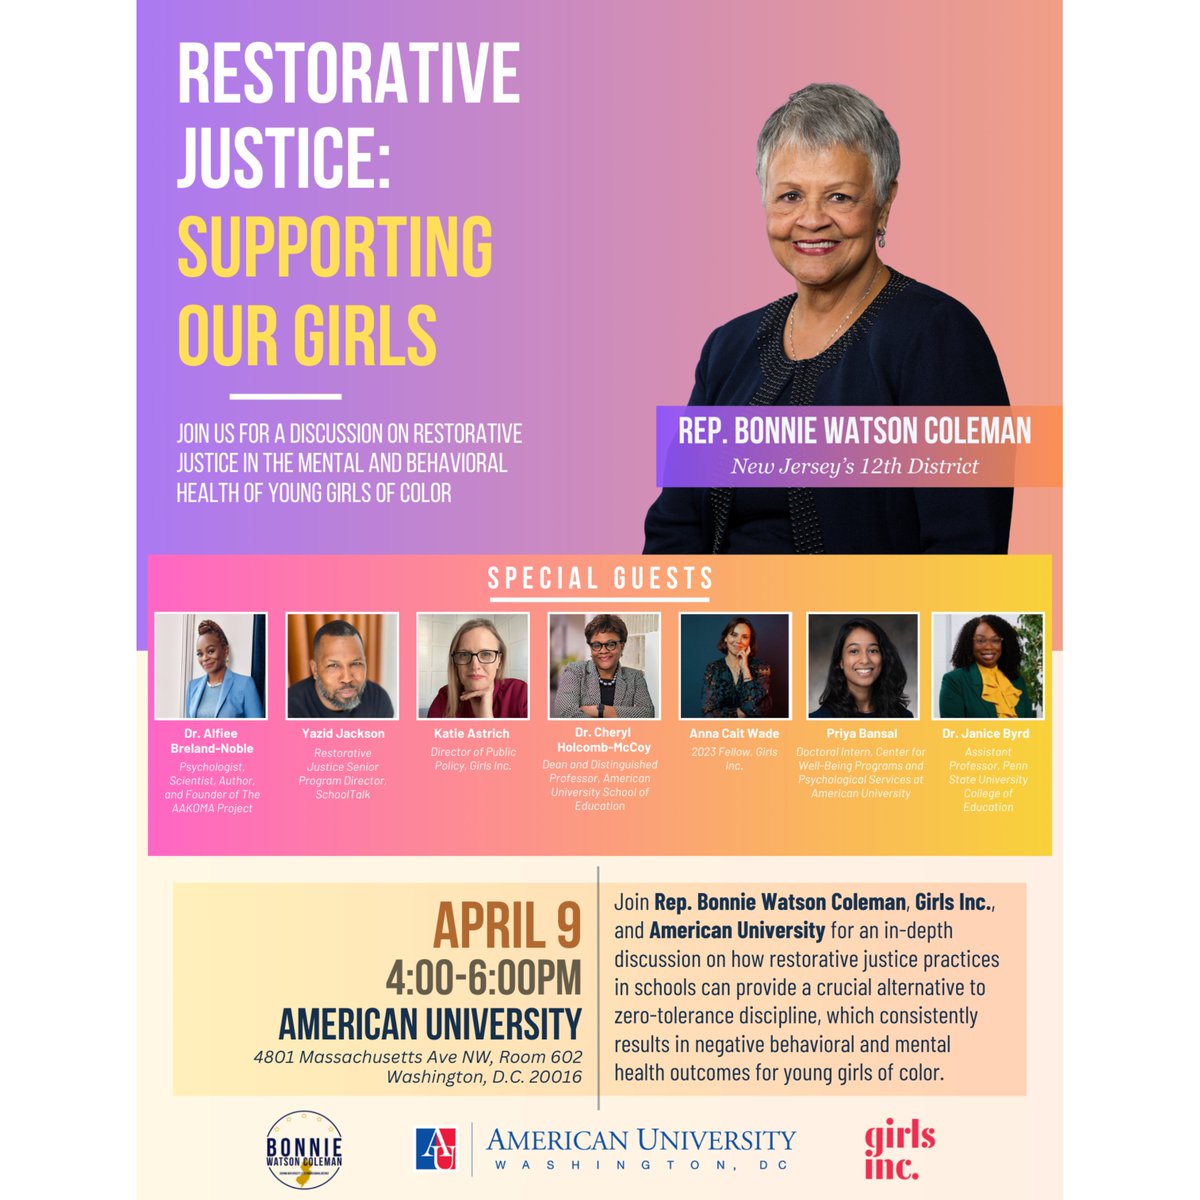 #Event > Join Rep. Bonnie Watson Coleman (D-NJ), SOE Dean Cheryl Holcomb-McCoy, and other guests for 'Restorative Justice: Supporting Our Girls' > Next Tuesday, April 9, 2024, 4-6:00 p.m. > Location: @AmericanU's Spring Valley Building, Room 602 > Free / Registration Not Required